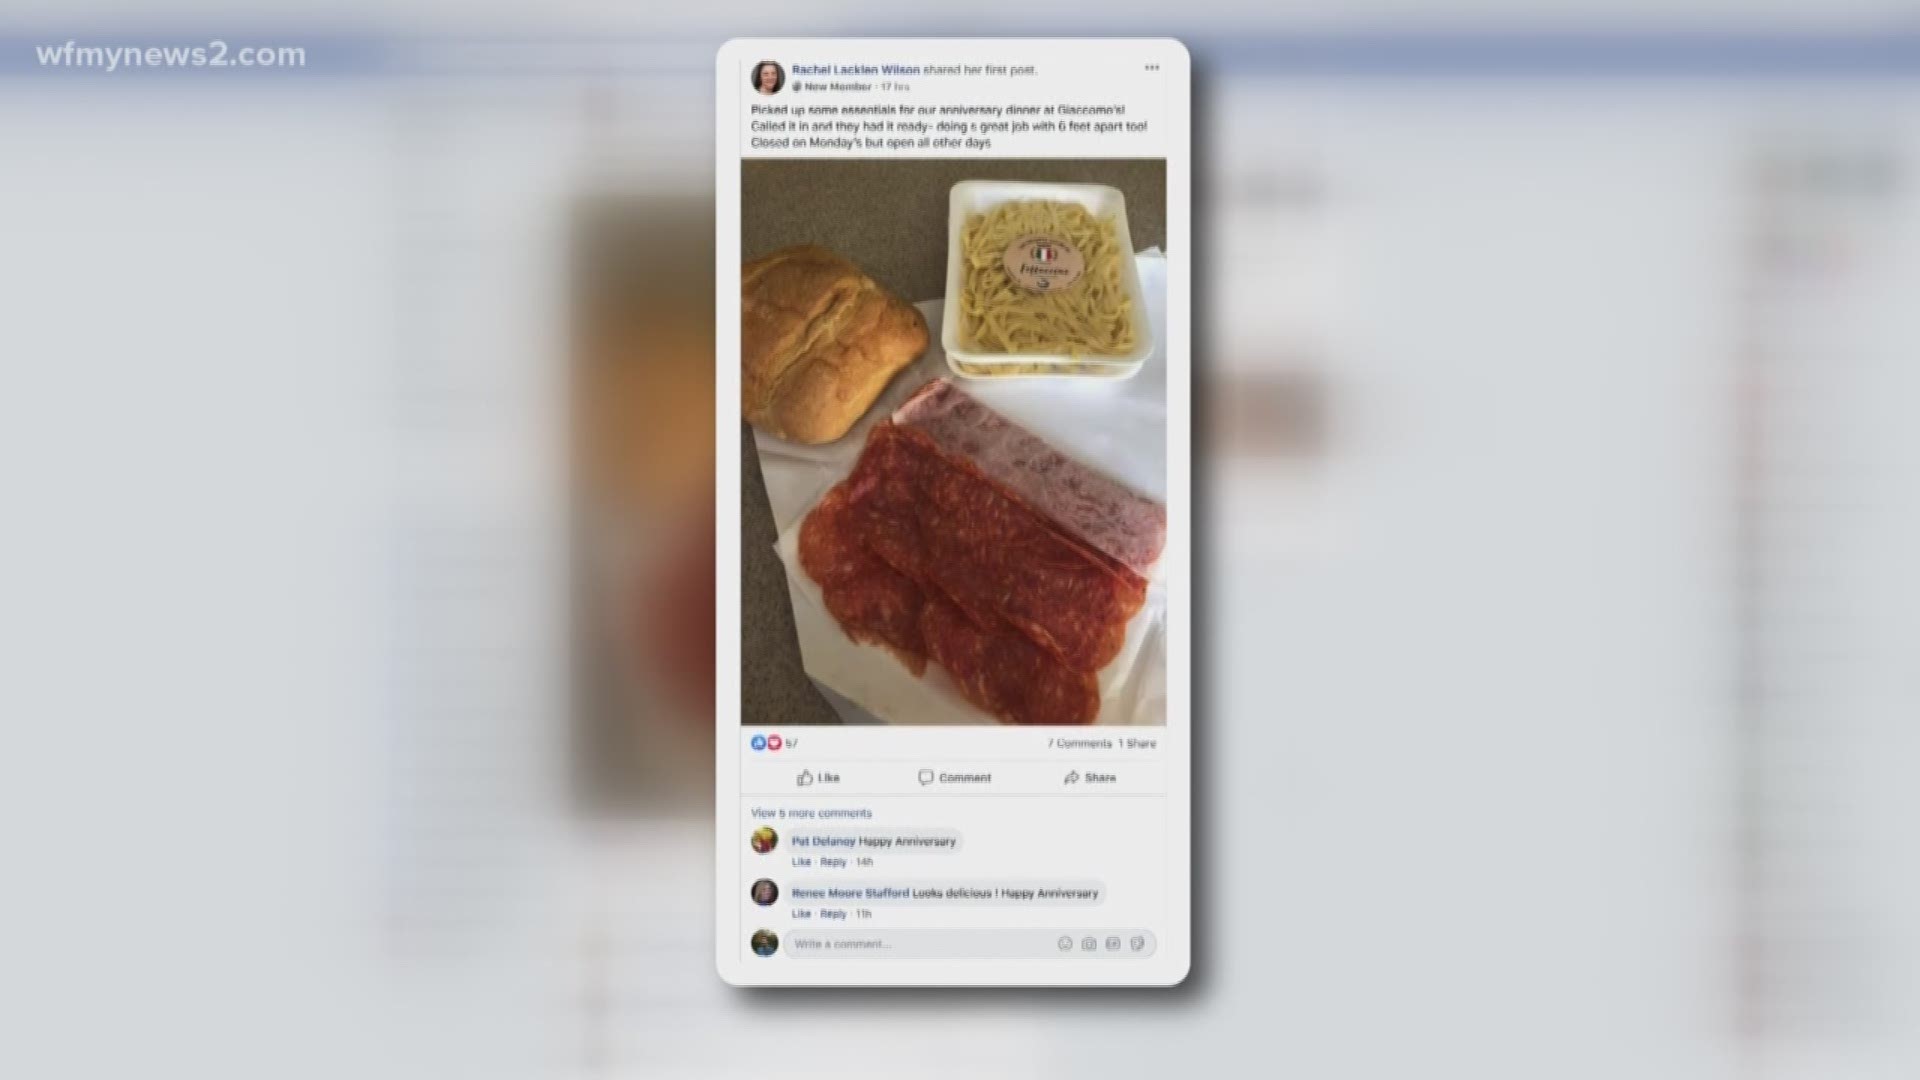 Kim Brewer, the owner of Melt Kitchen in Greensboro, talks about how a Facebook page is helping business owners adjust to the coronavirus pandemic. Now you can help!